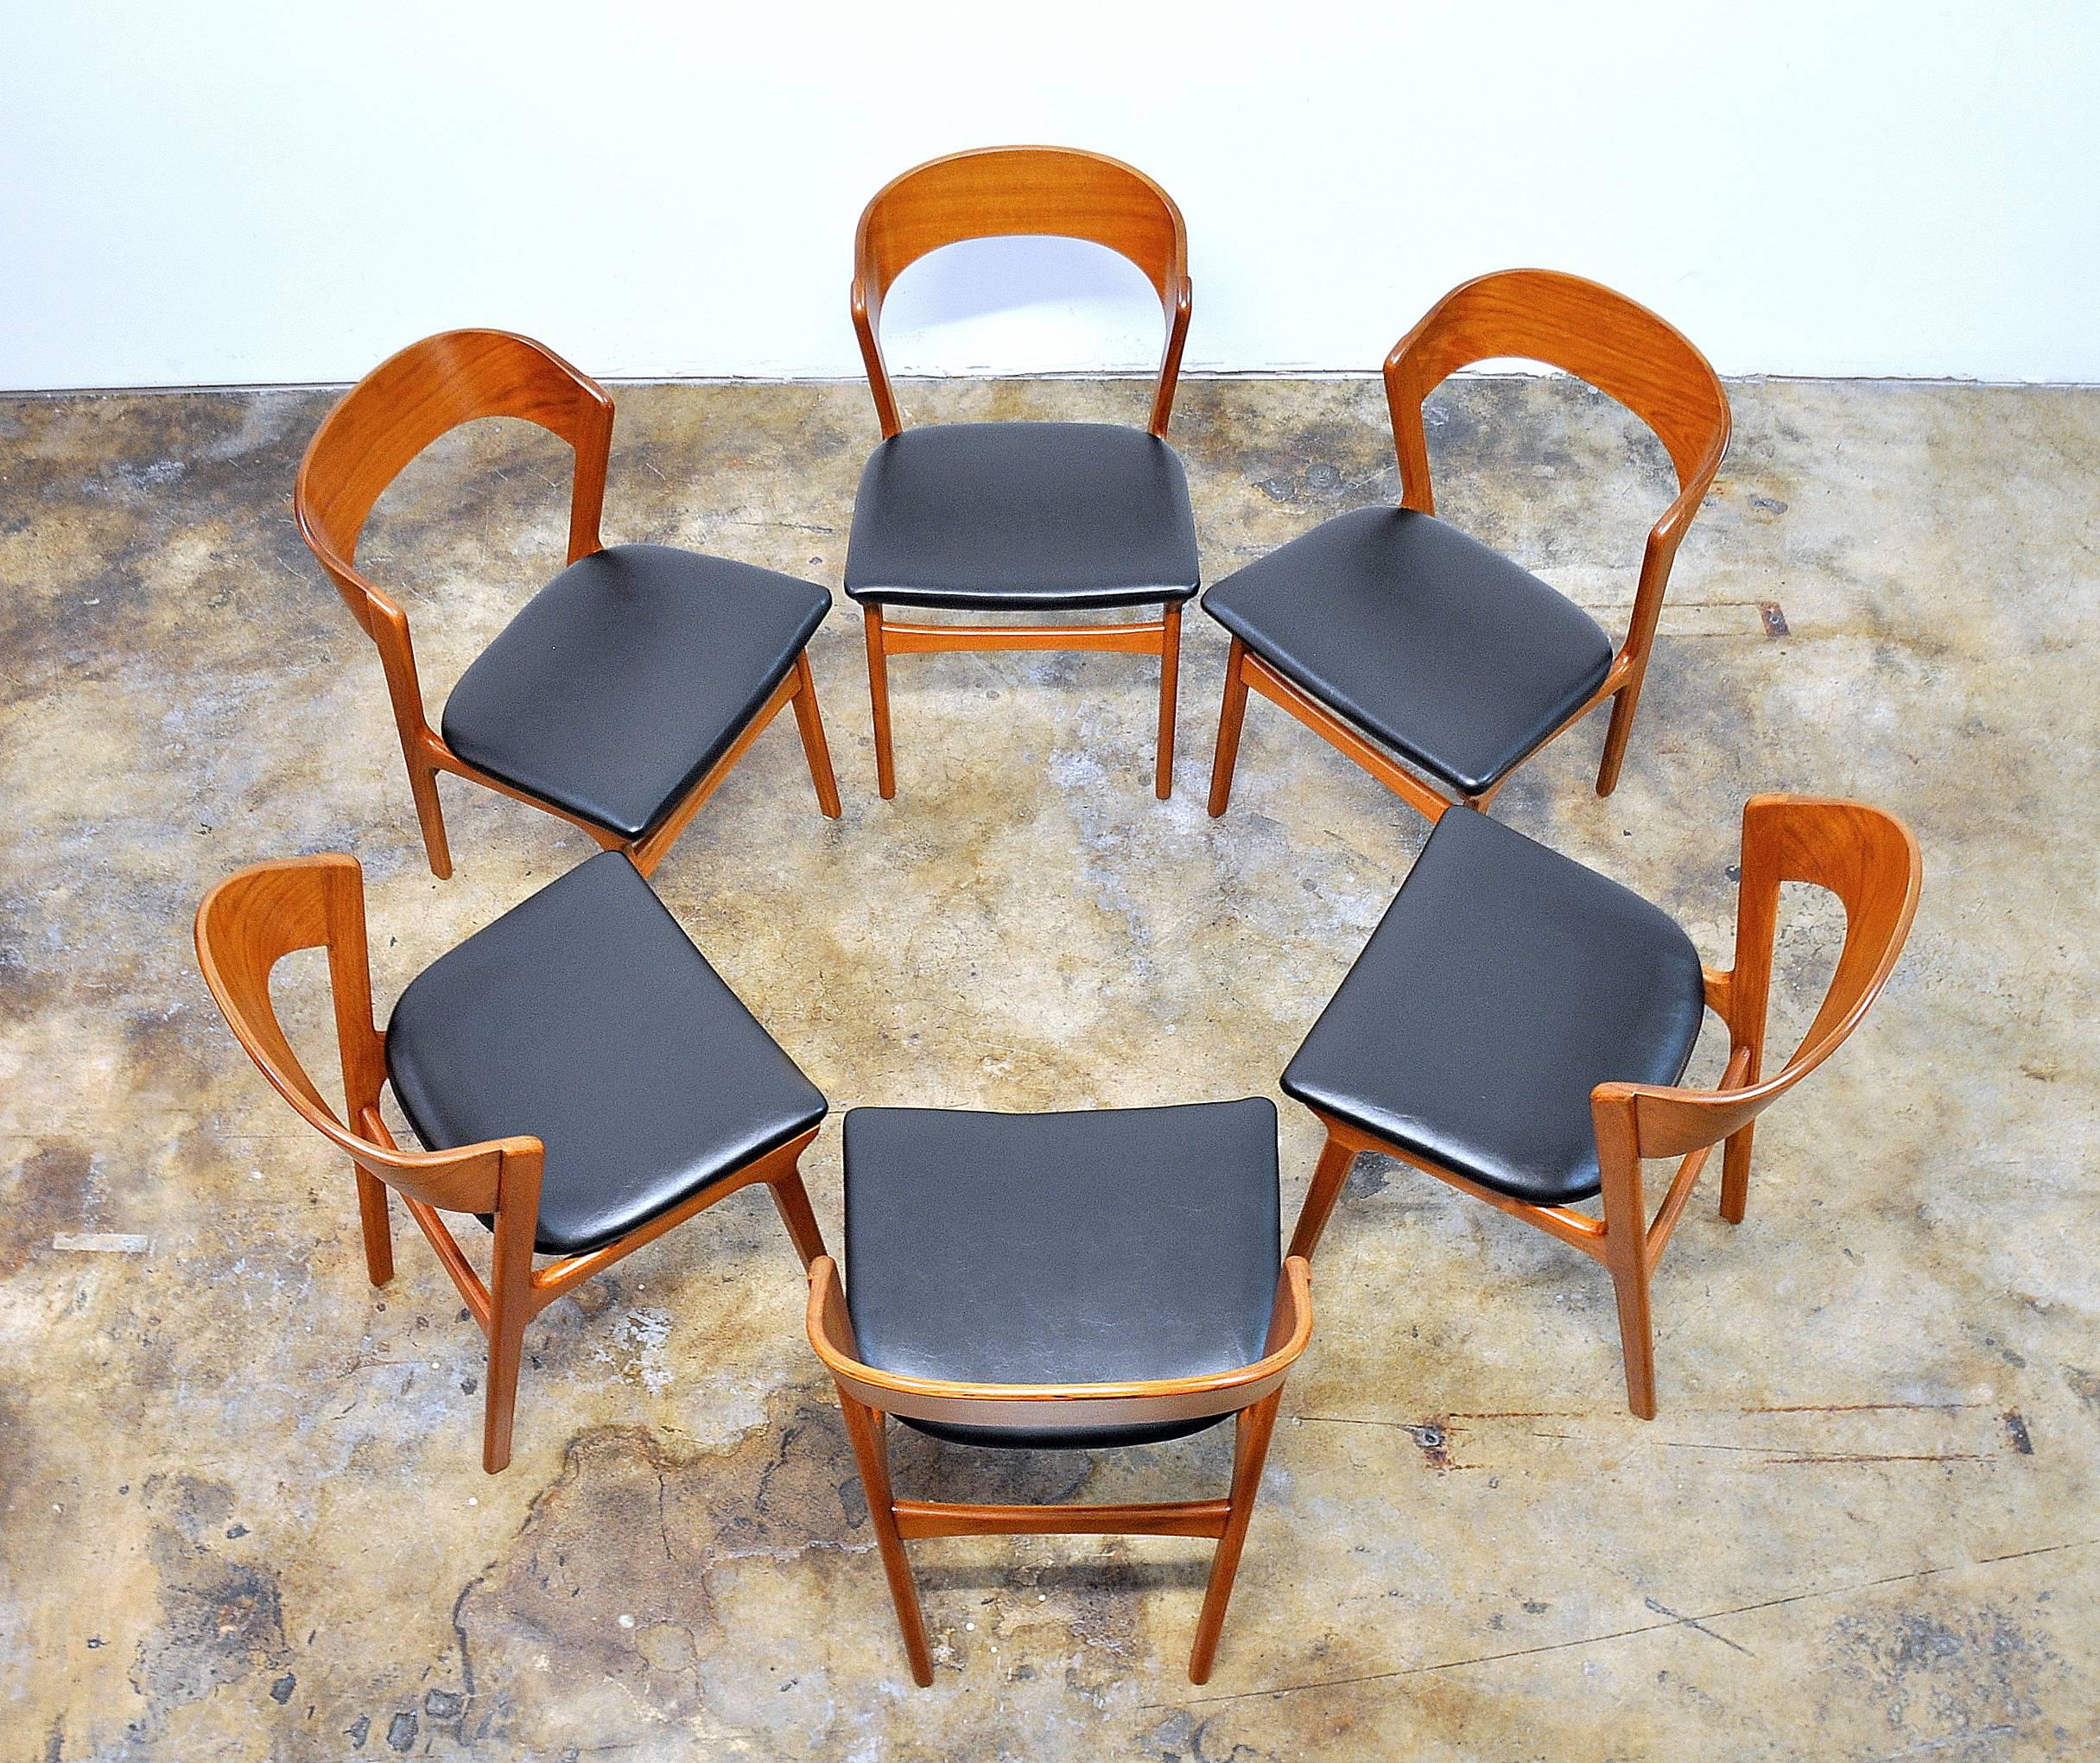 Stunning set of one owner mid-century Danish modern solid teak chairs with curved and slanted ribbon backrests for unparalleled comfort and striking lines. The chairs have been refinished, and the seats recovered in period correct, soft, black faux